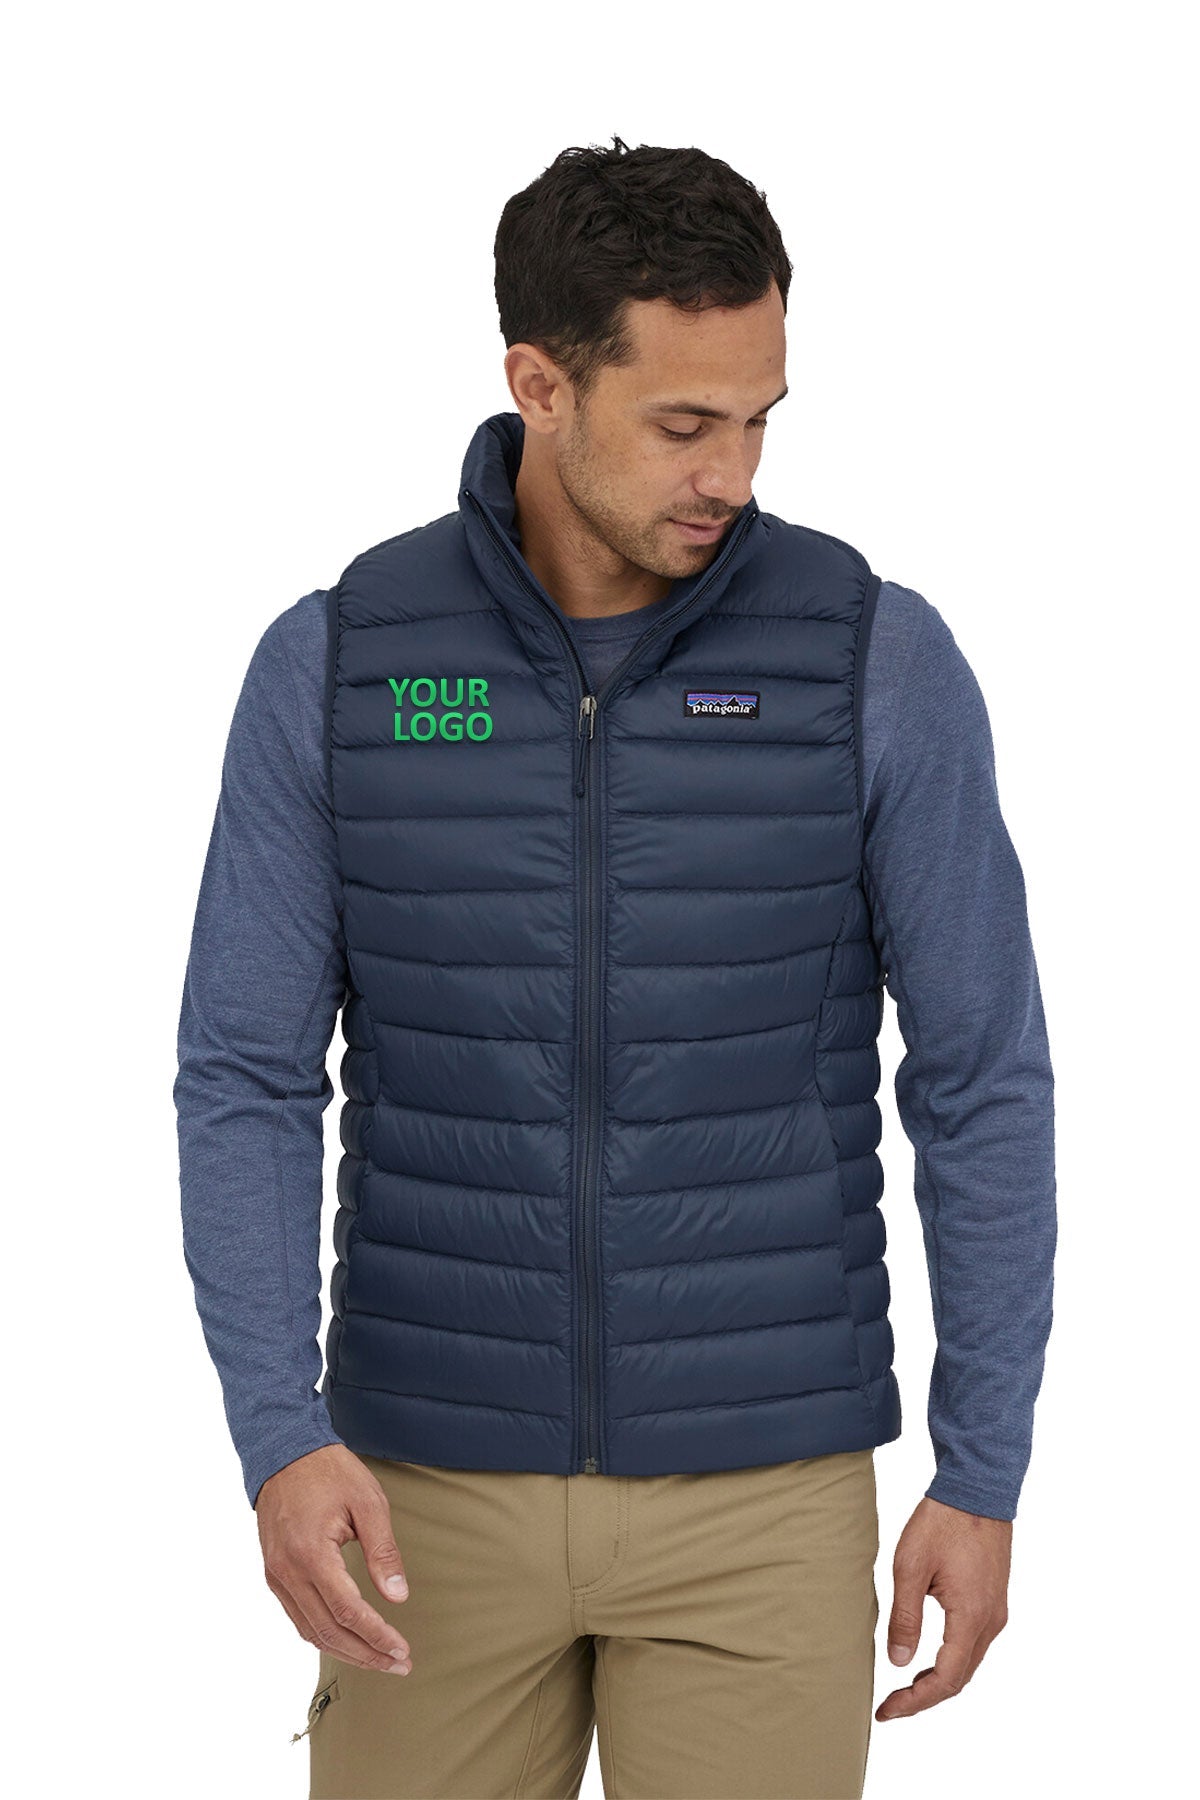 Patagonia Men's Down Sweater Customized Vests, New Navy